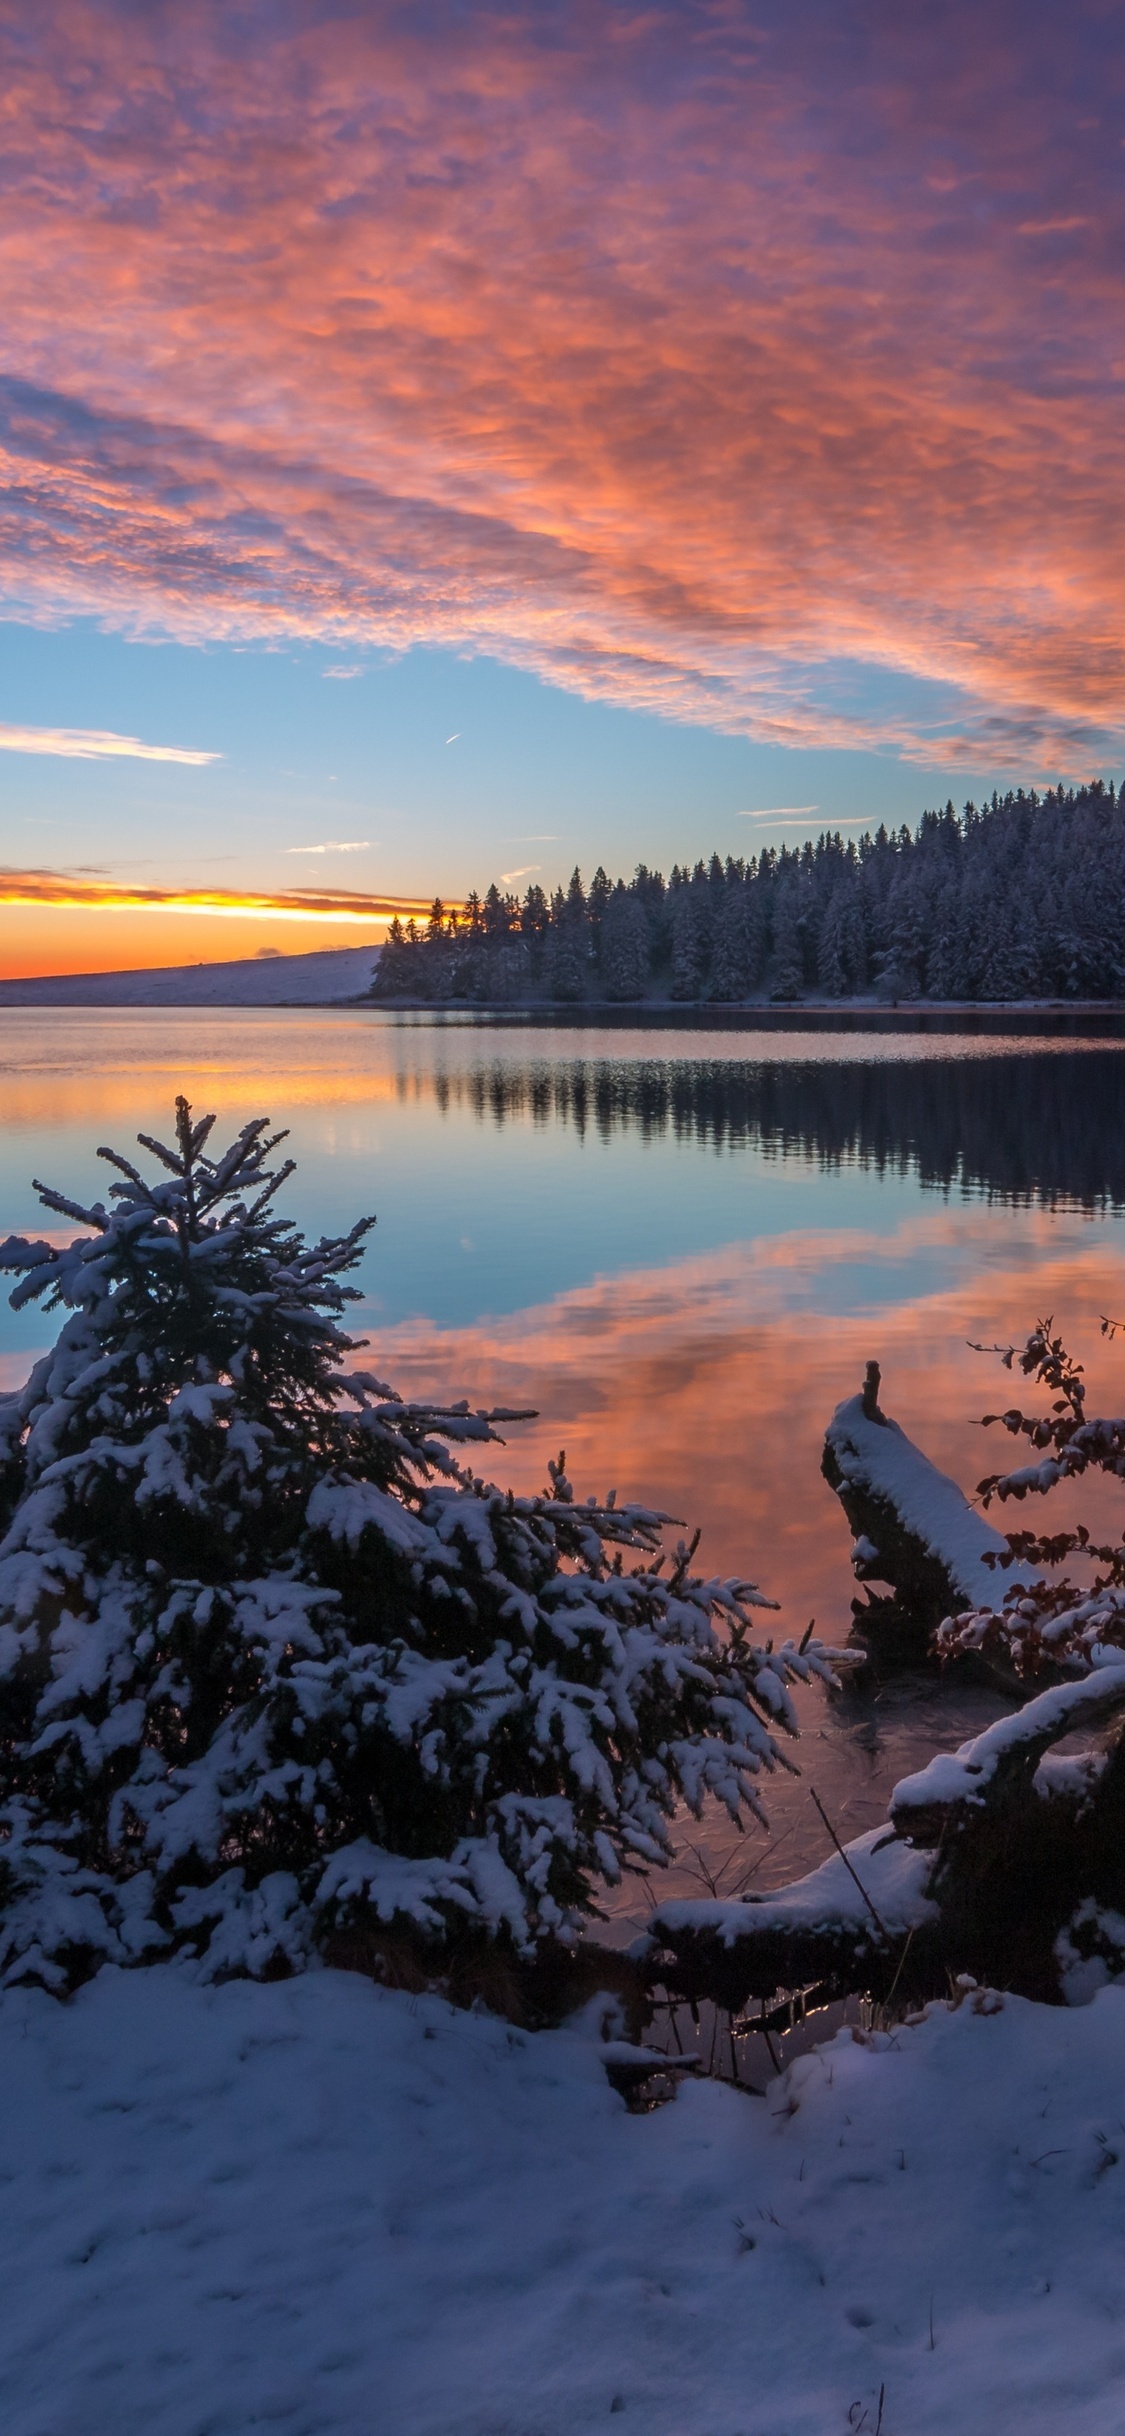 Lake snow, Evening sunset, 5K iPhone wallpapers, Breathtaking scenery, 1130x2440 HD Phone